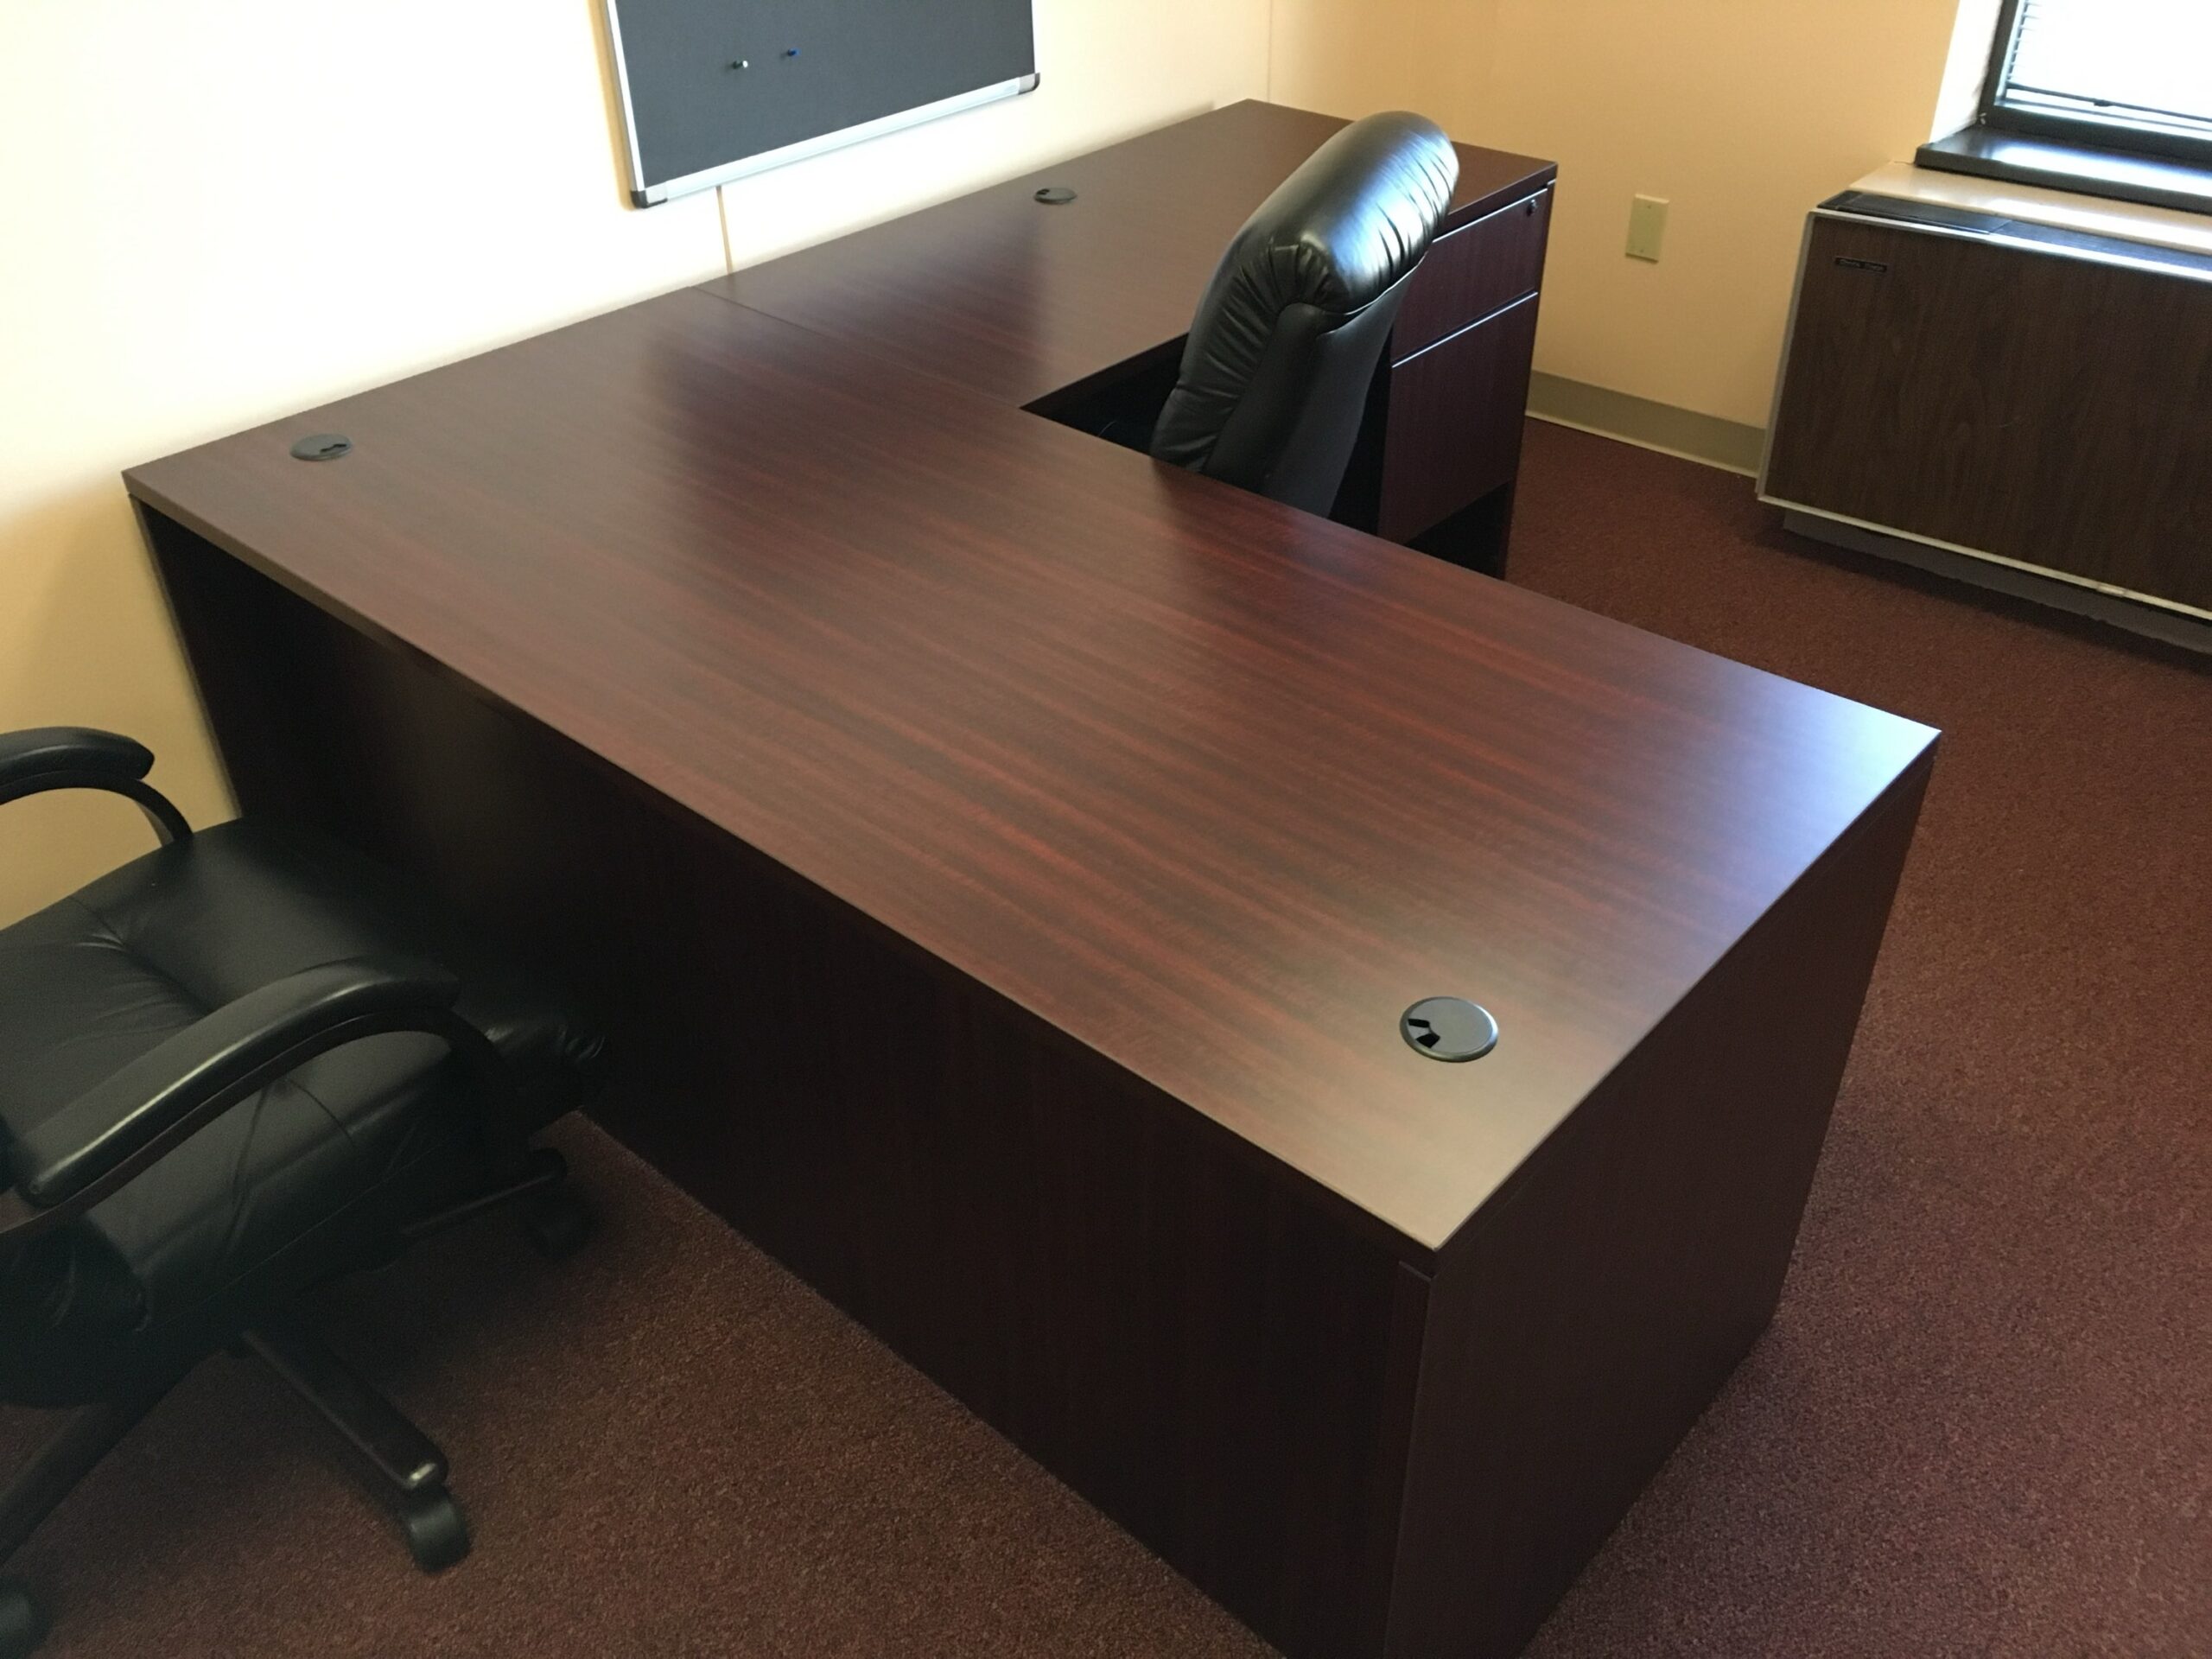 Used, Like New L-Desk for Sale